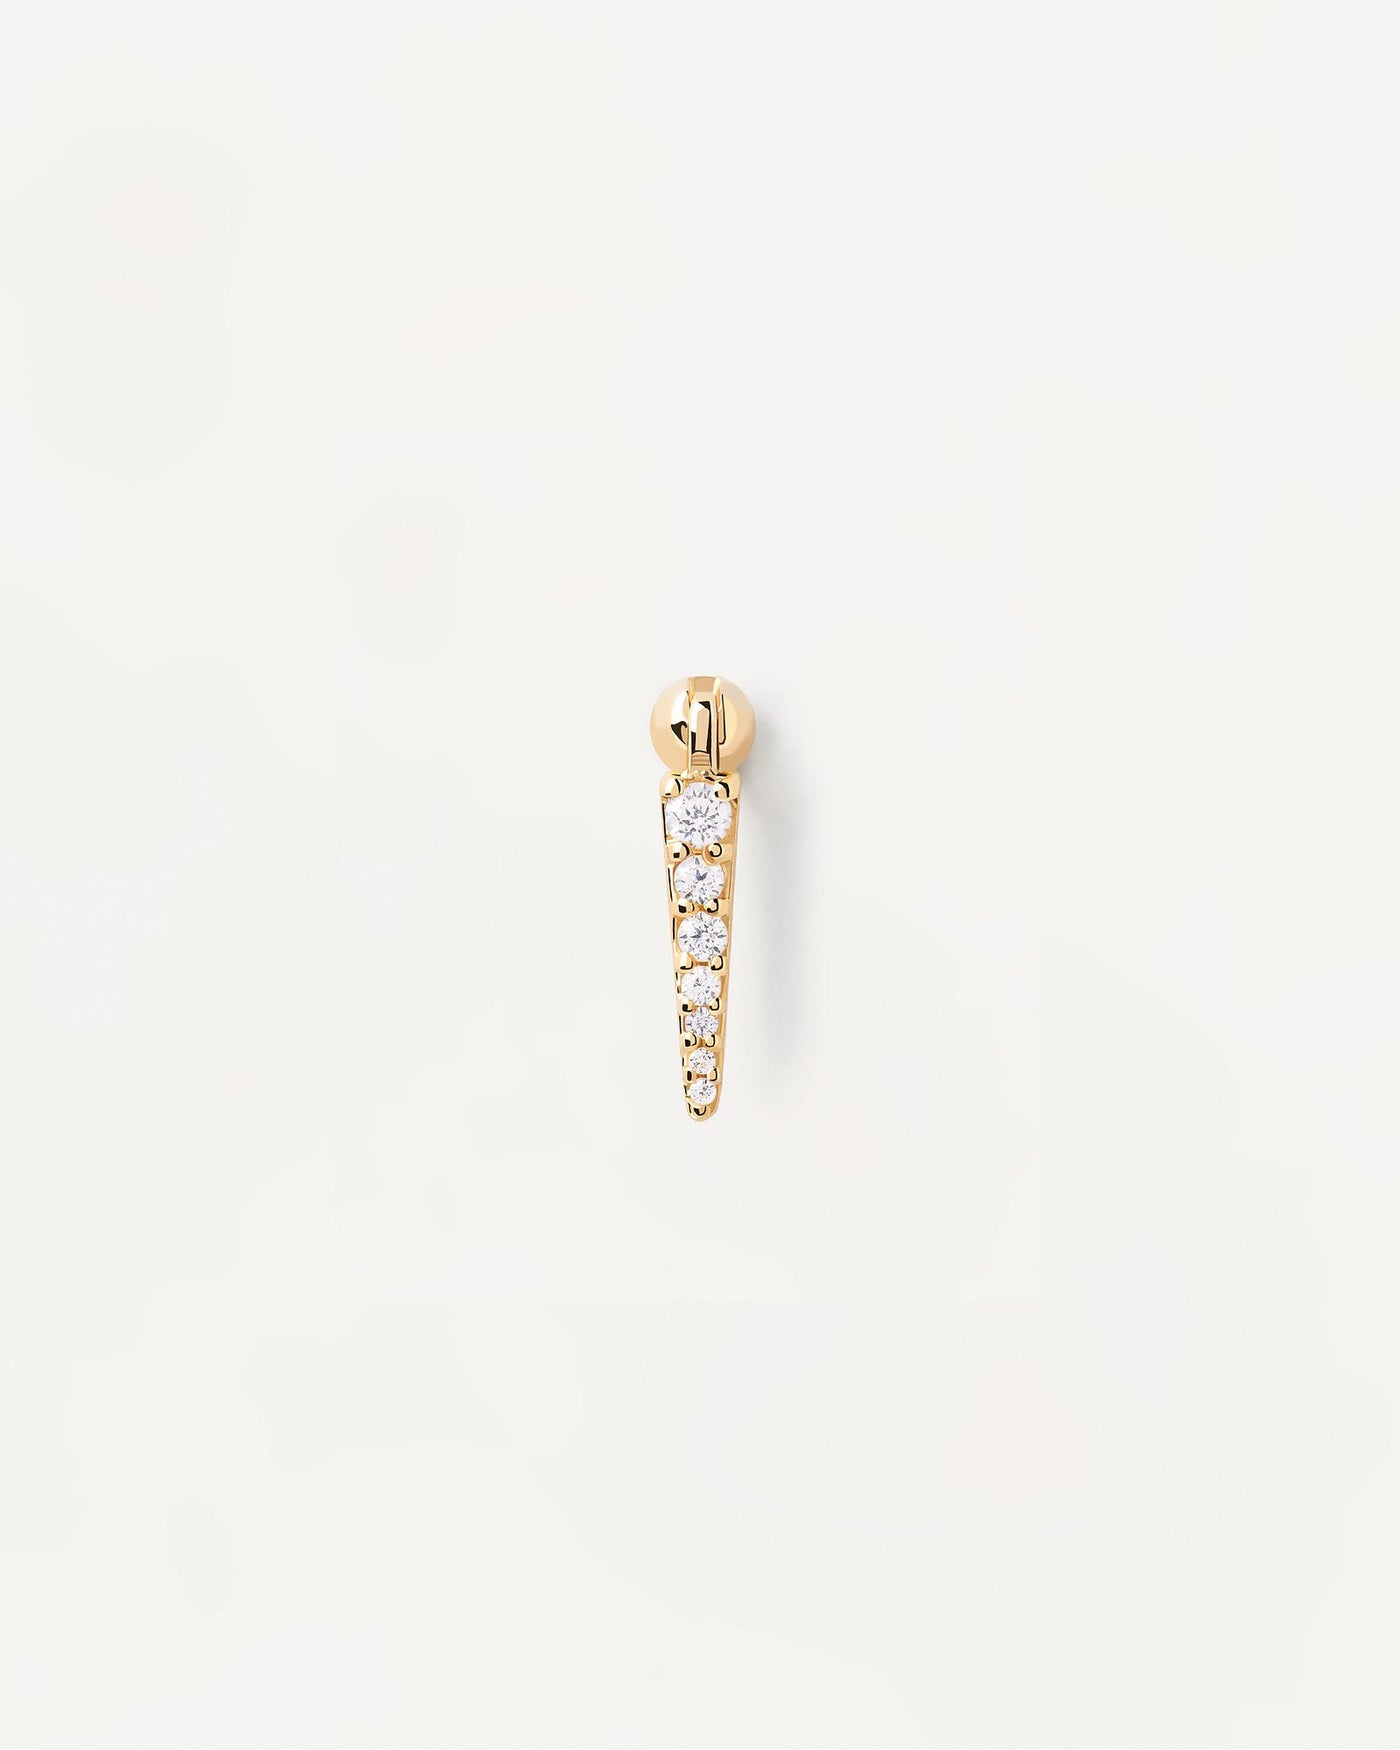 2024 Selection | Vero Single Earring. Gold-plated ear piercing in tip shape with white zirconia. Get the latest arrival from PDPAOLA. Place your order safely and get this Best Seller. Free Shipping.